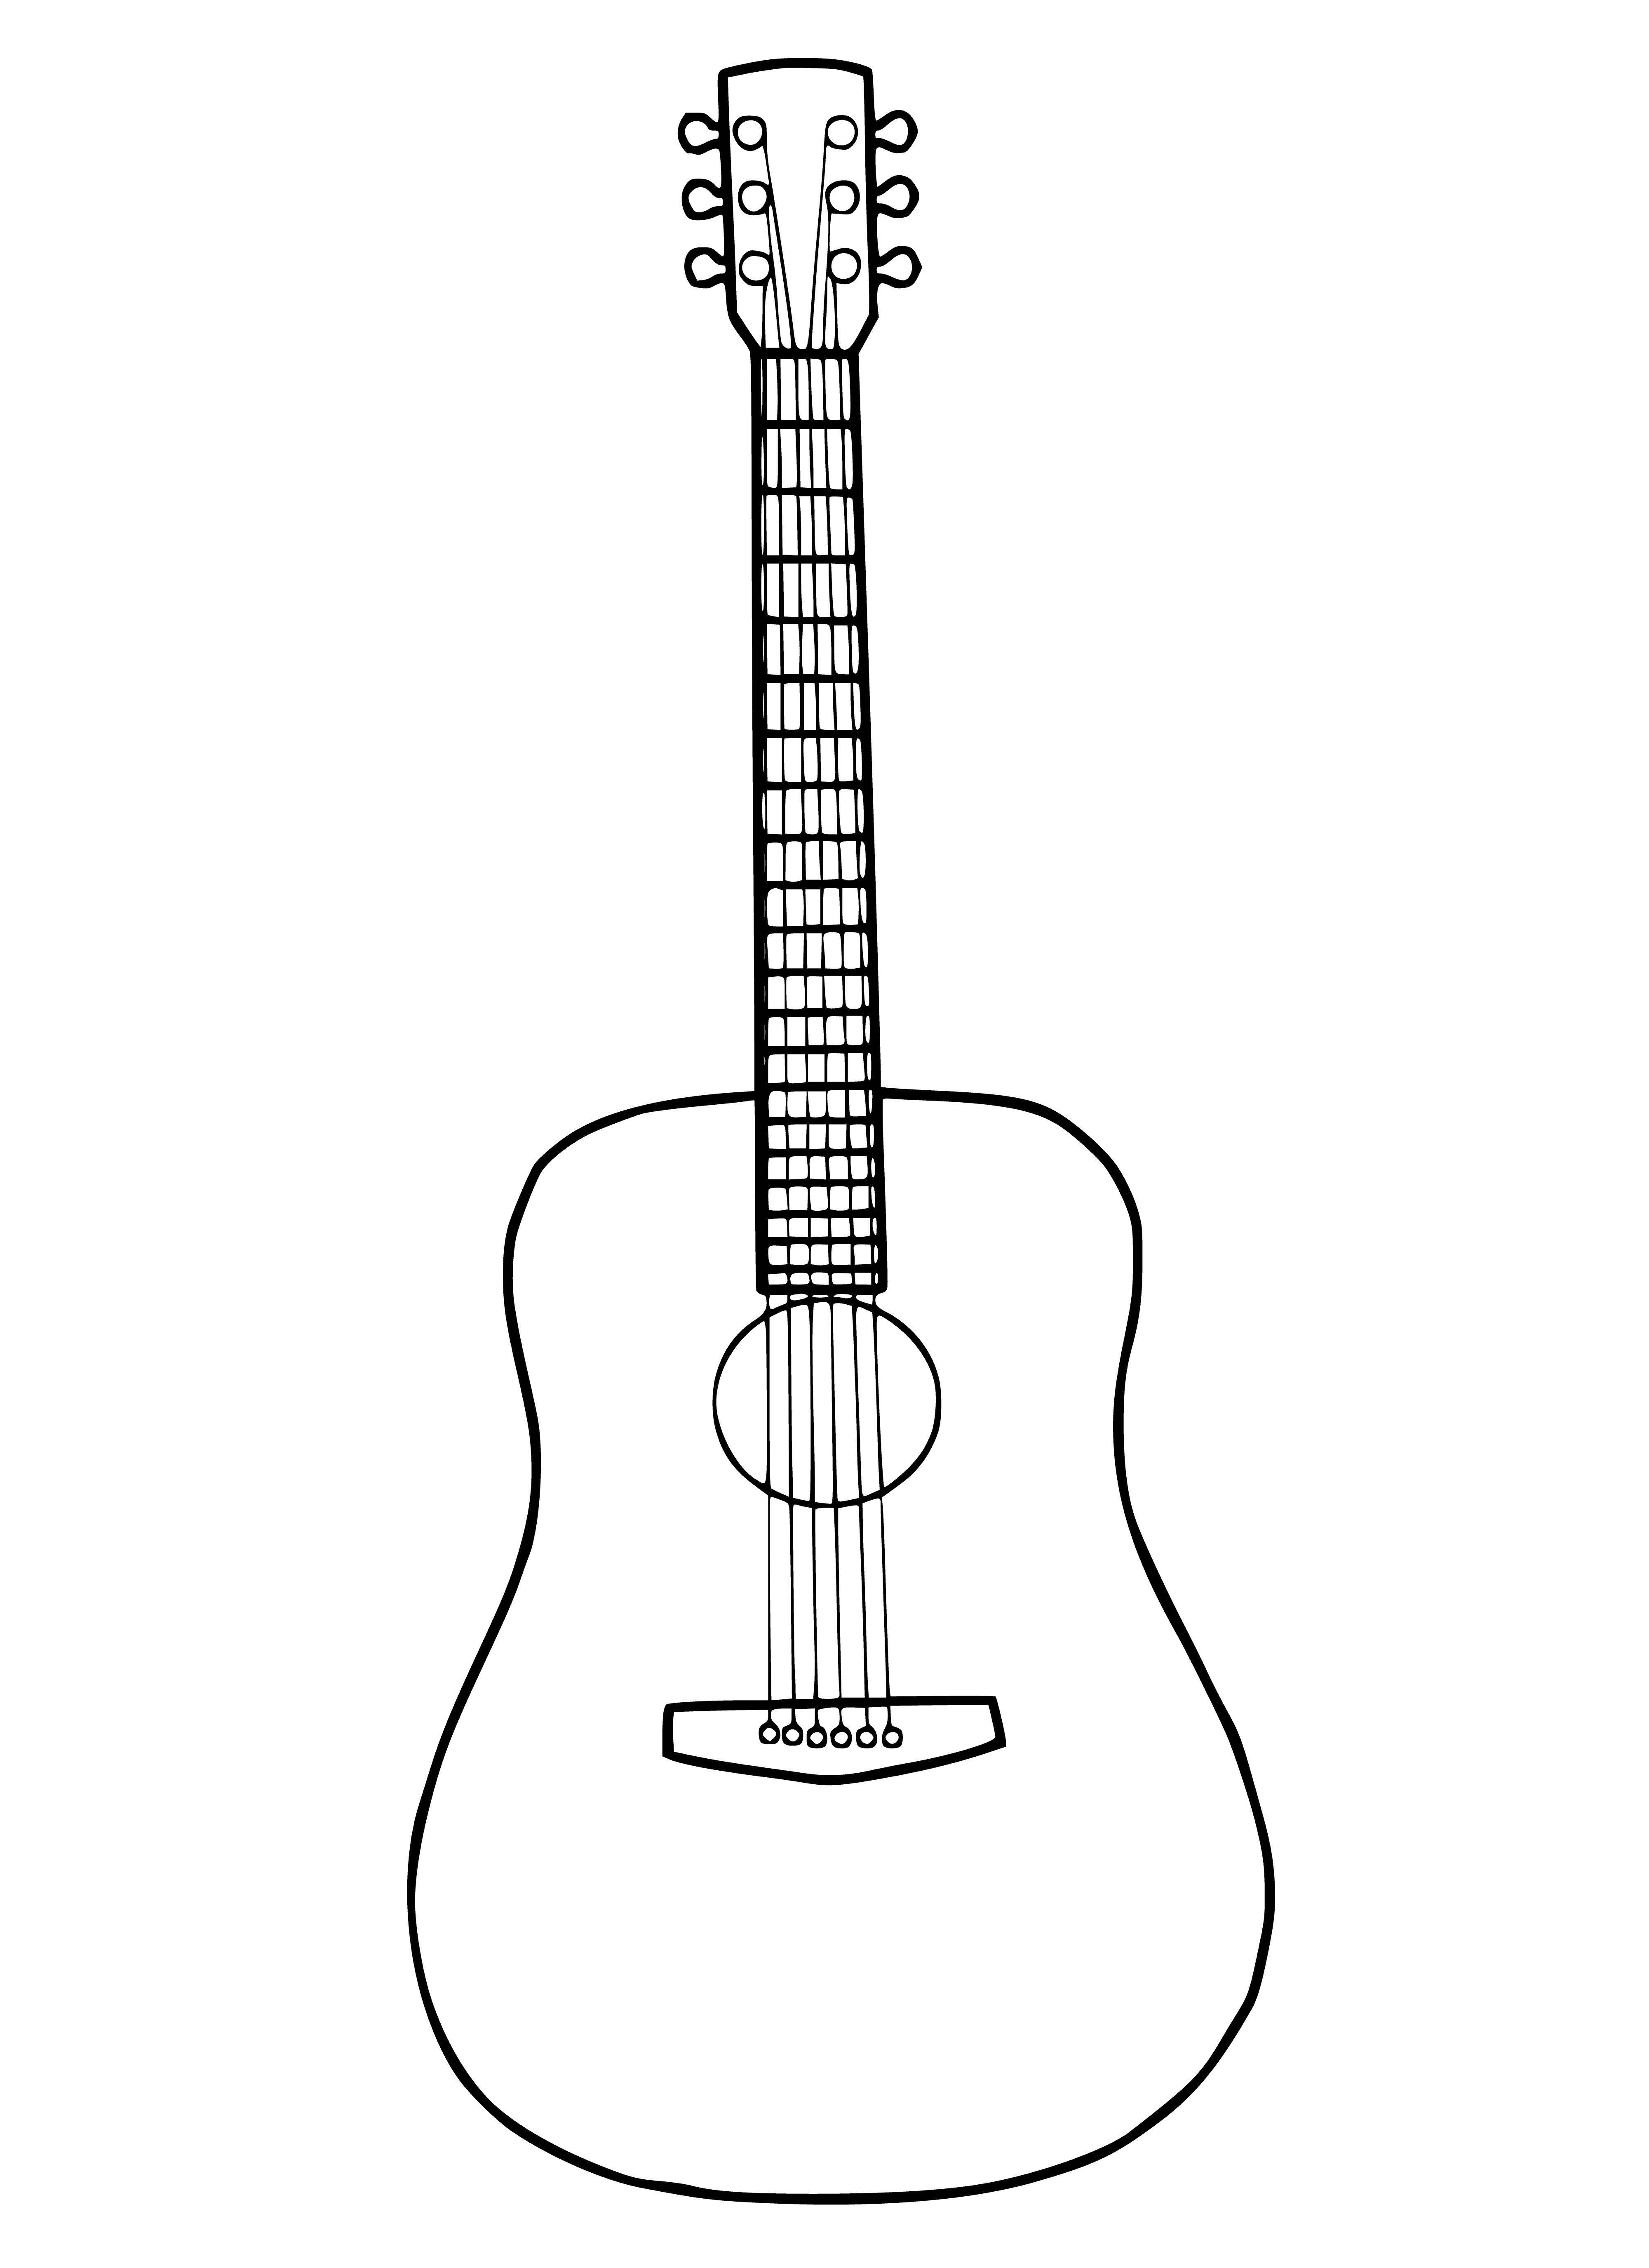 coloring page: Guitar is a stringed instru. Played by pressing strings to frets with left hand, plucking or strumming with right hand to create sound.